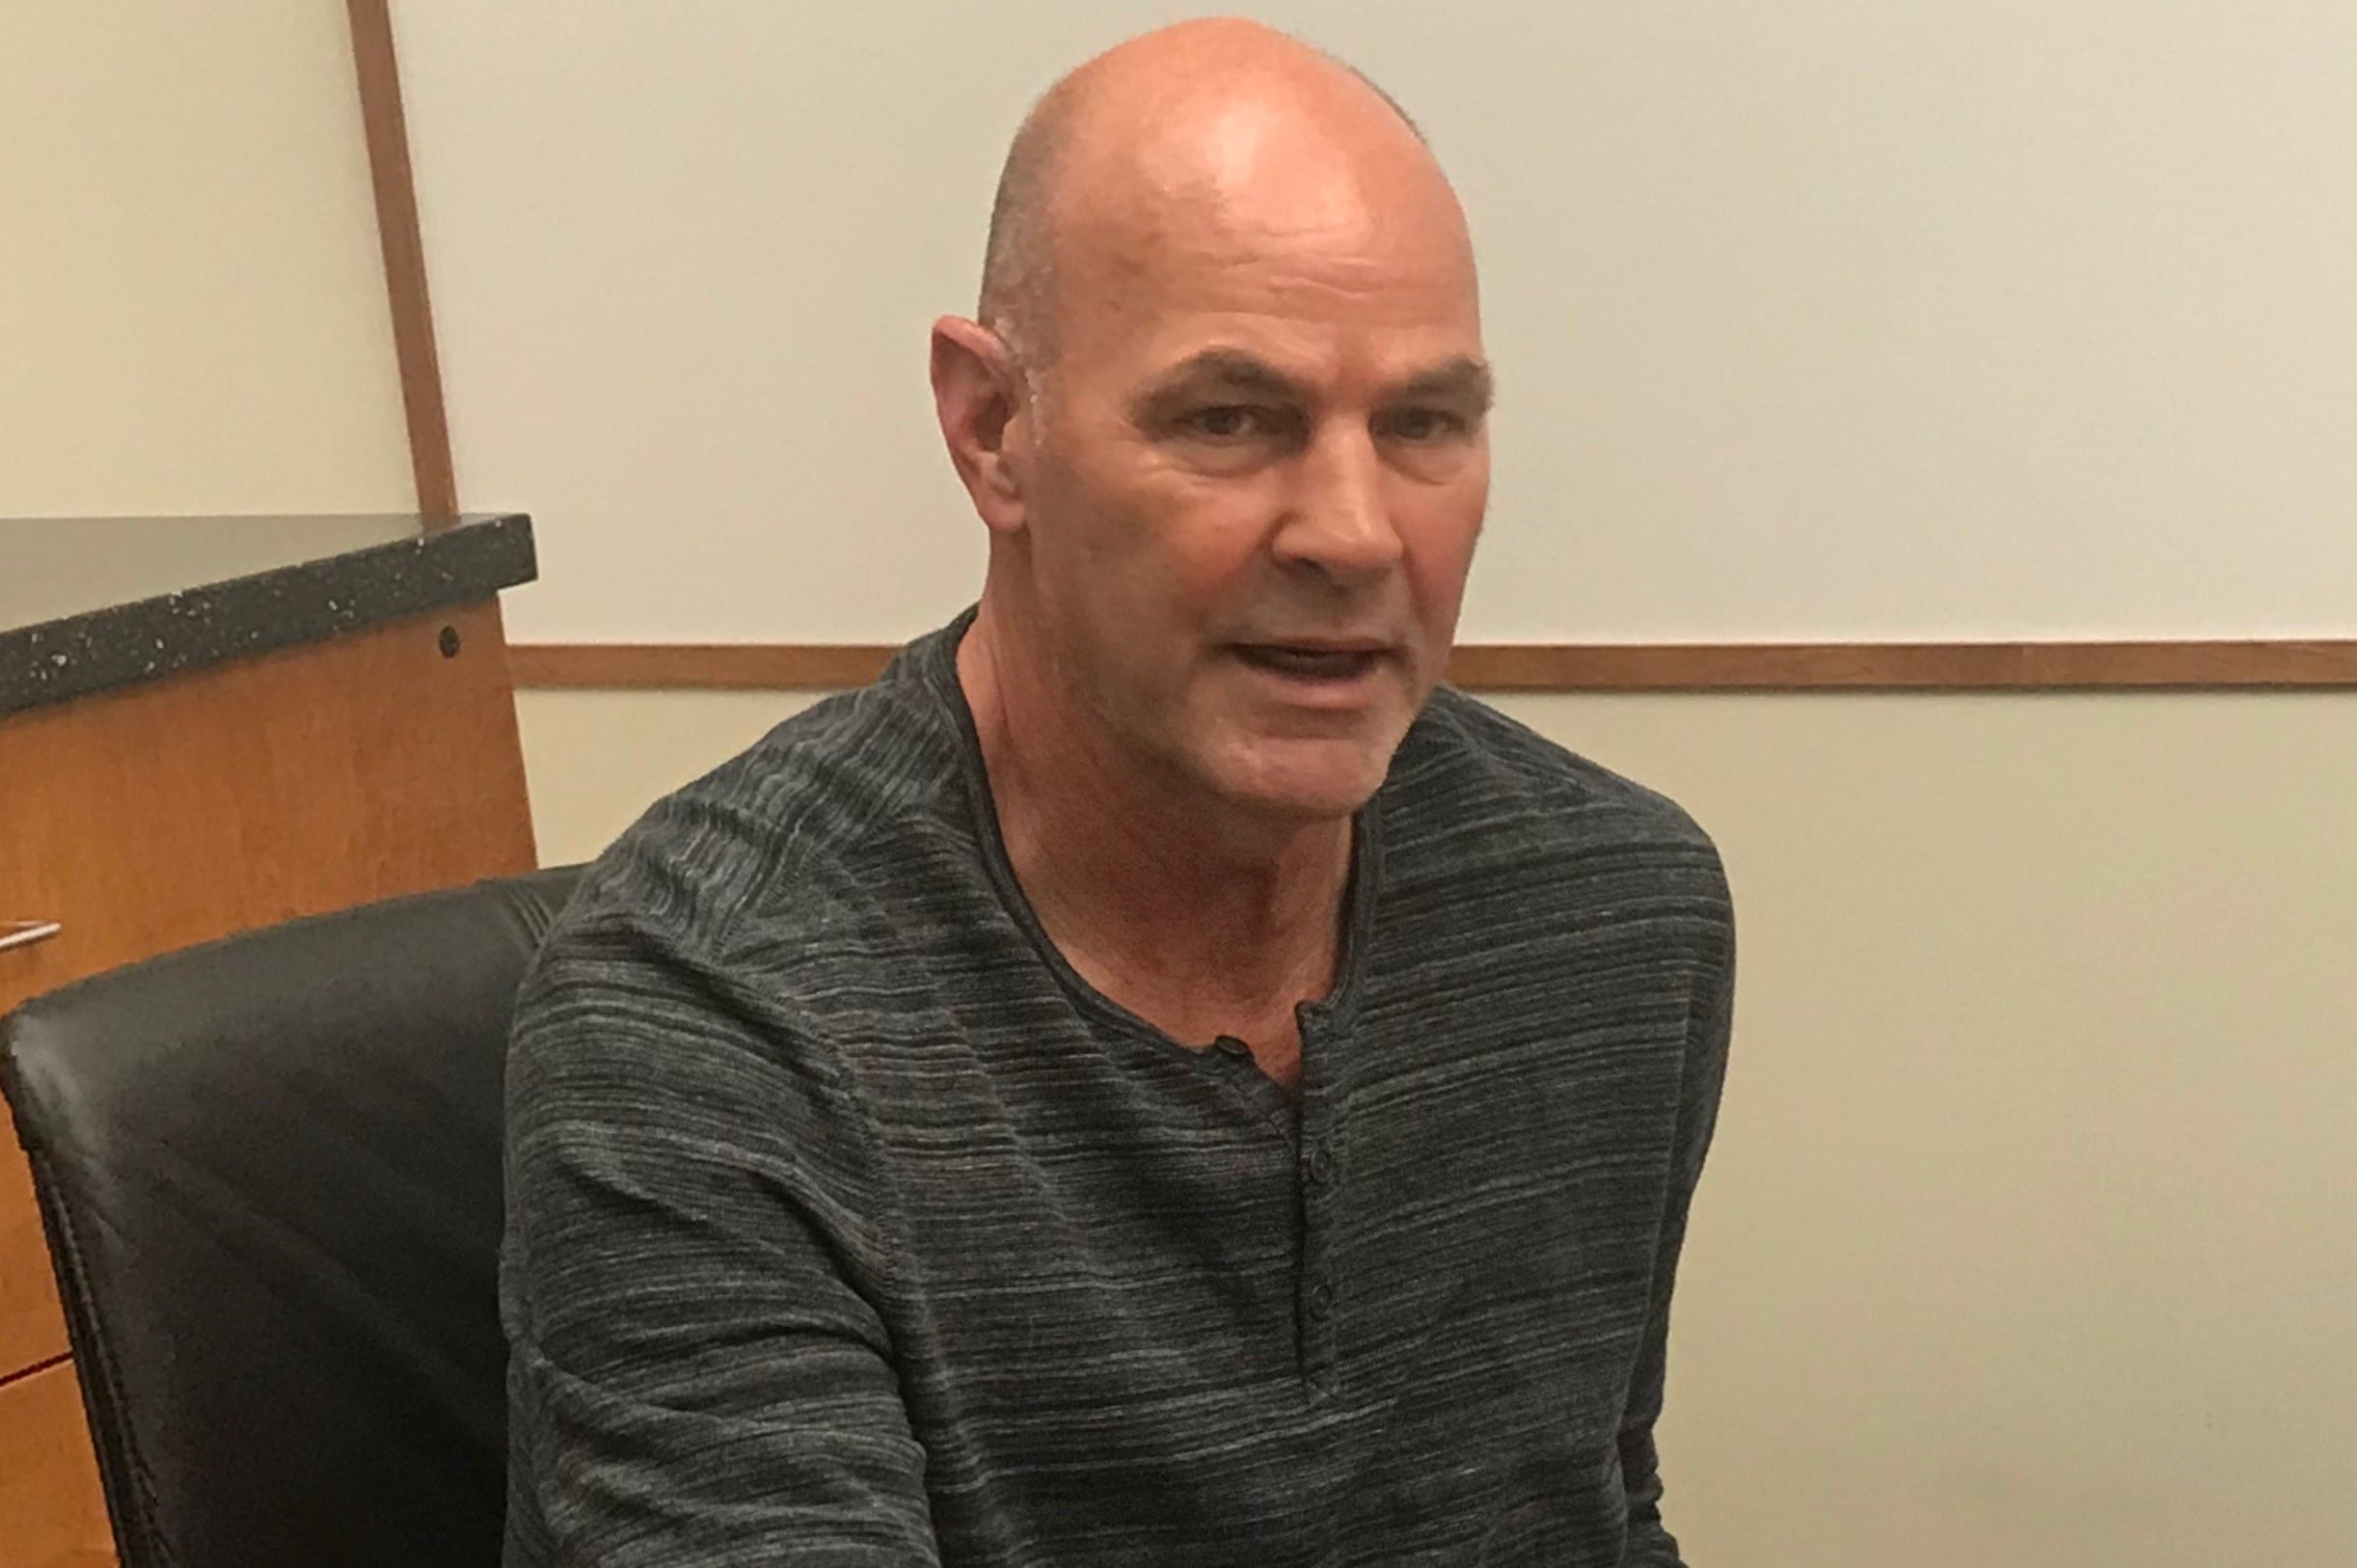 Events - The Kirk Gibson Foundation for Parkinson's